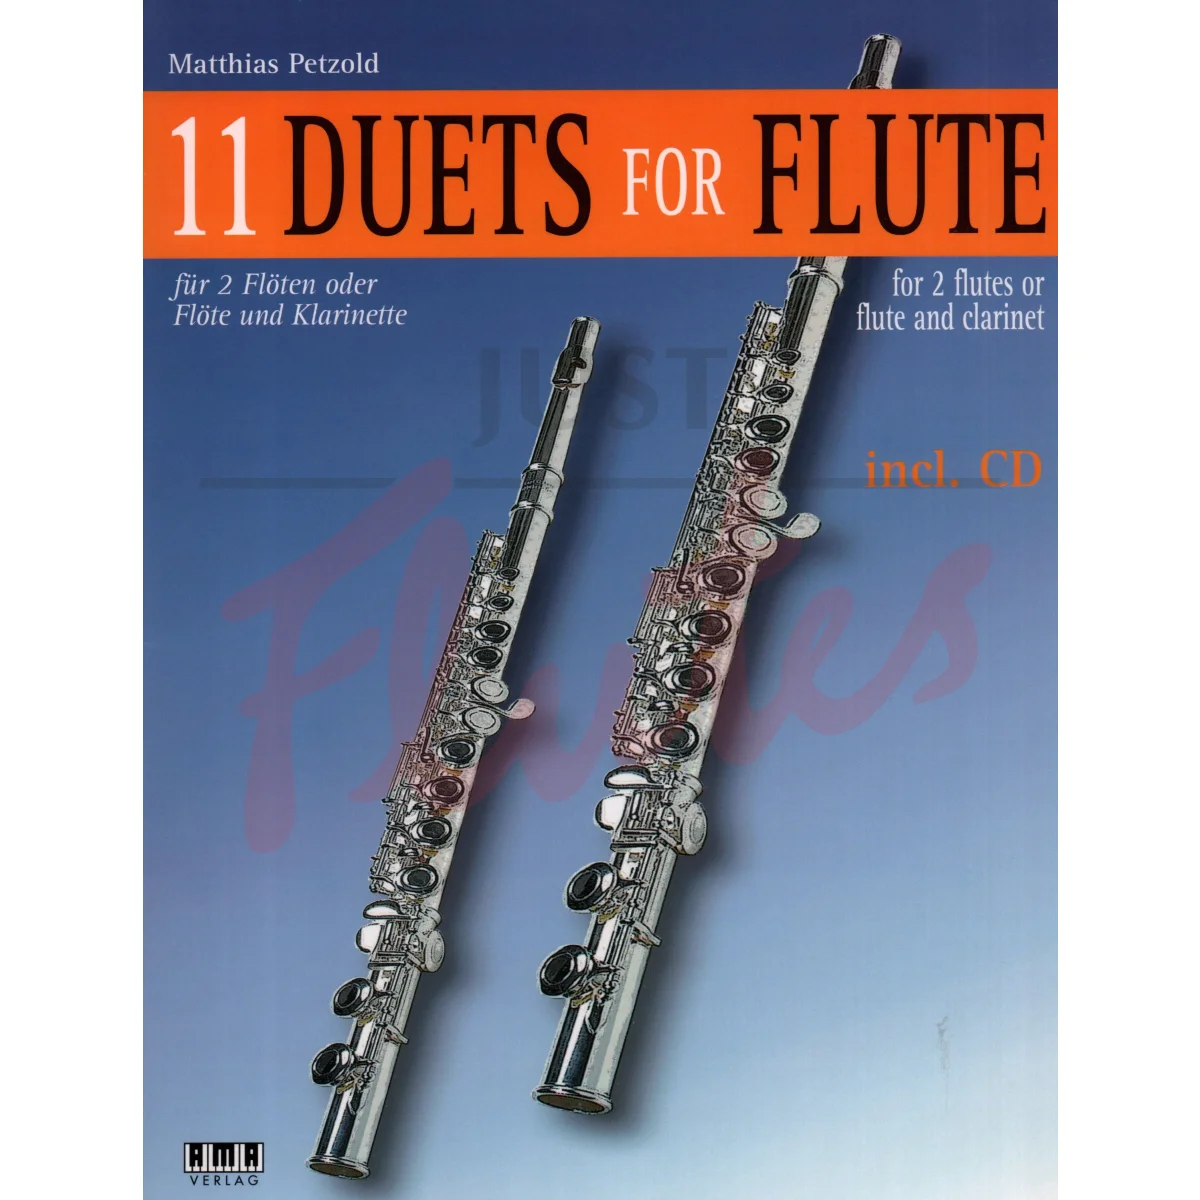 11 Duets for Flute